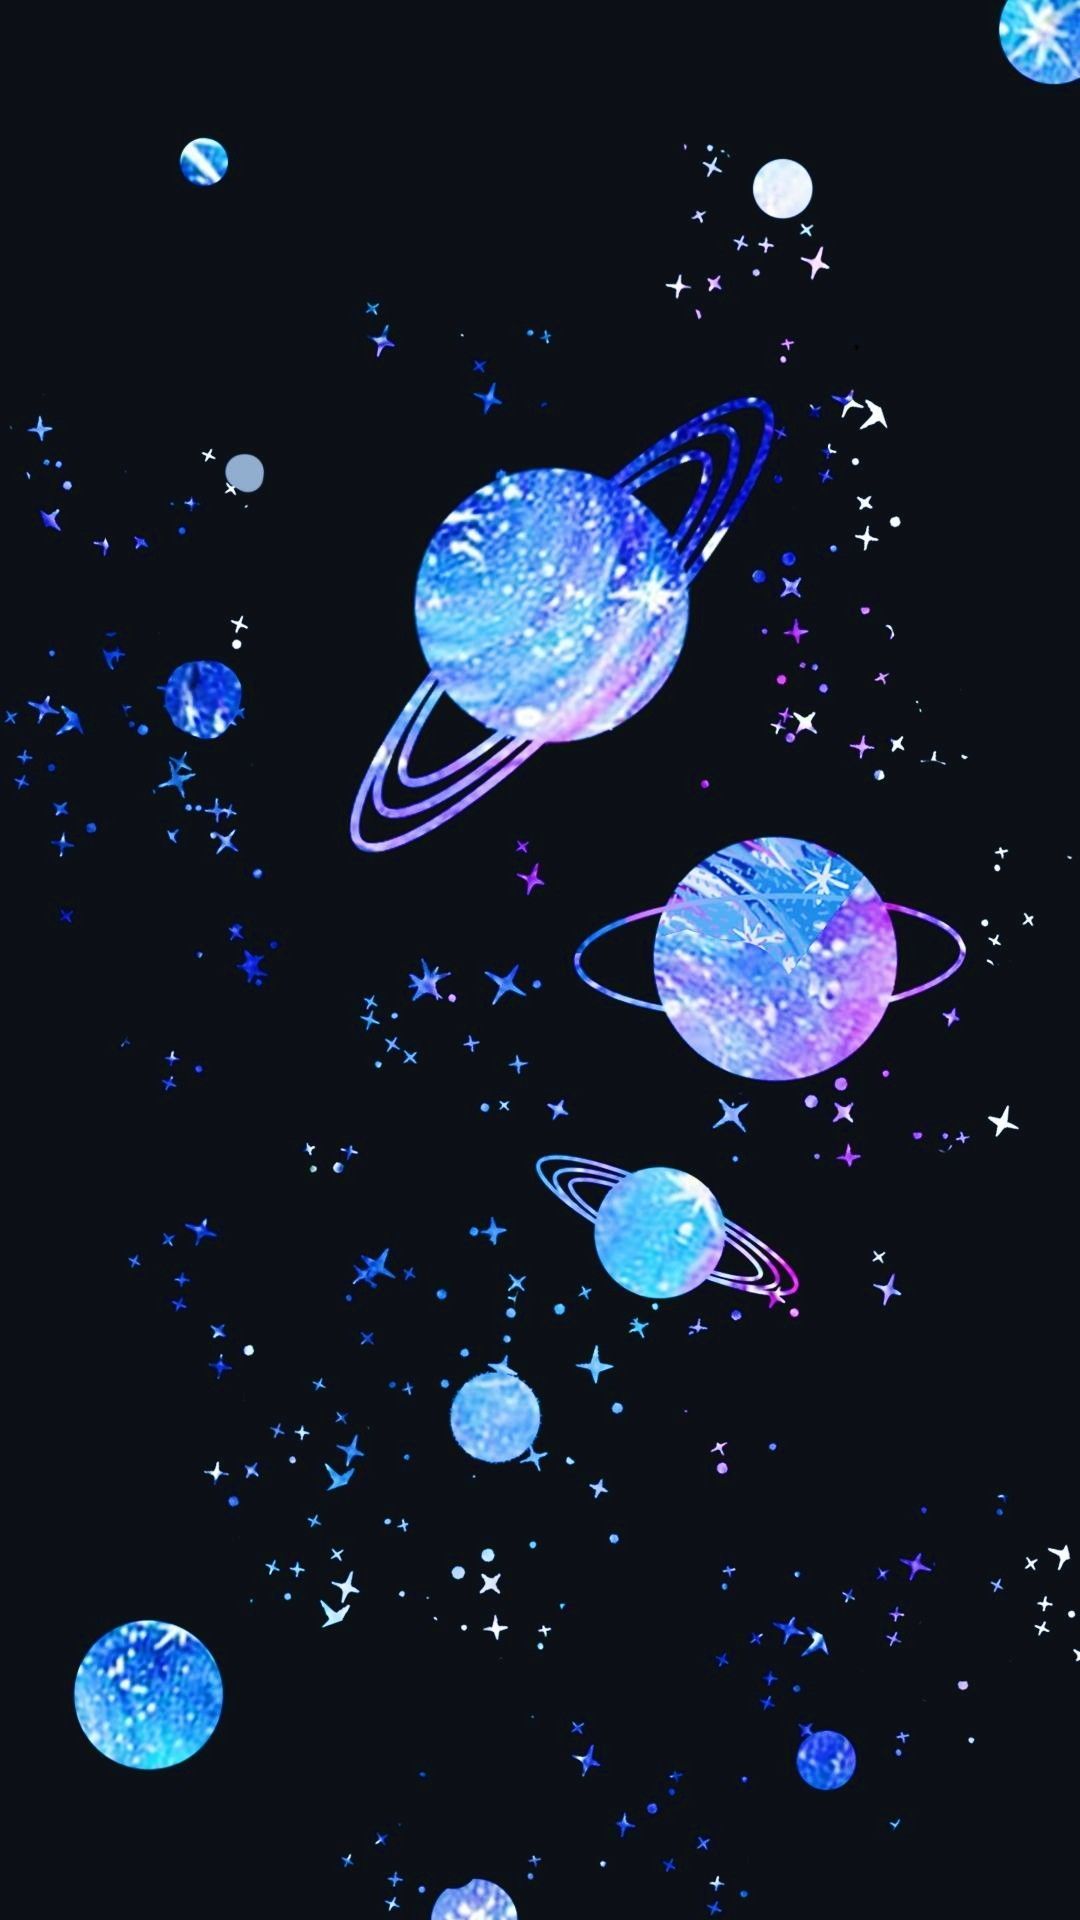 Planet Aesthetic Wallpapers on WallpaperDog